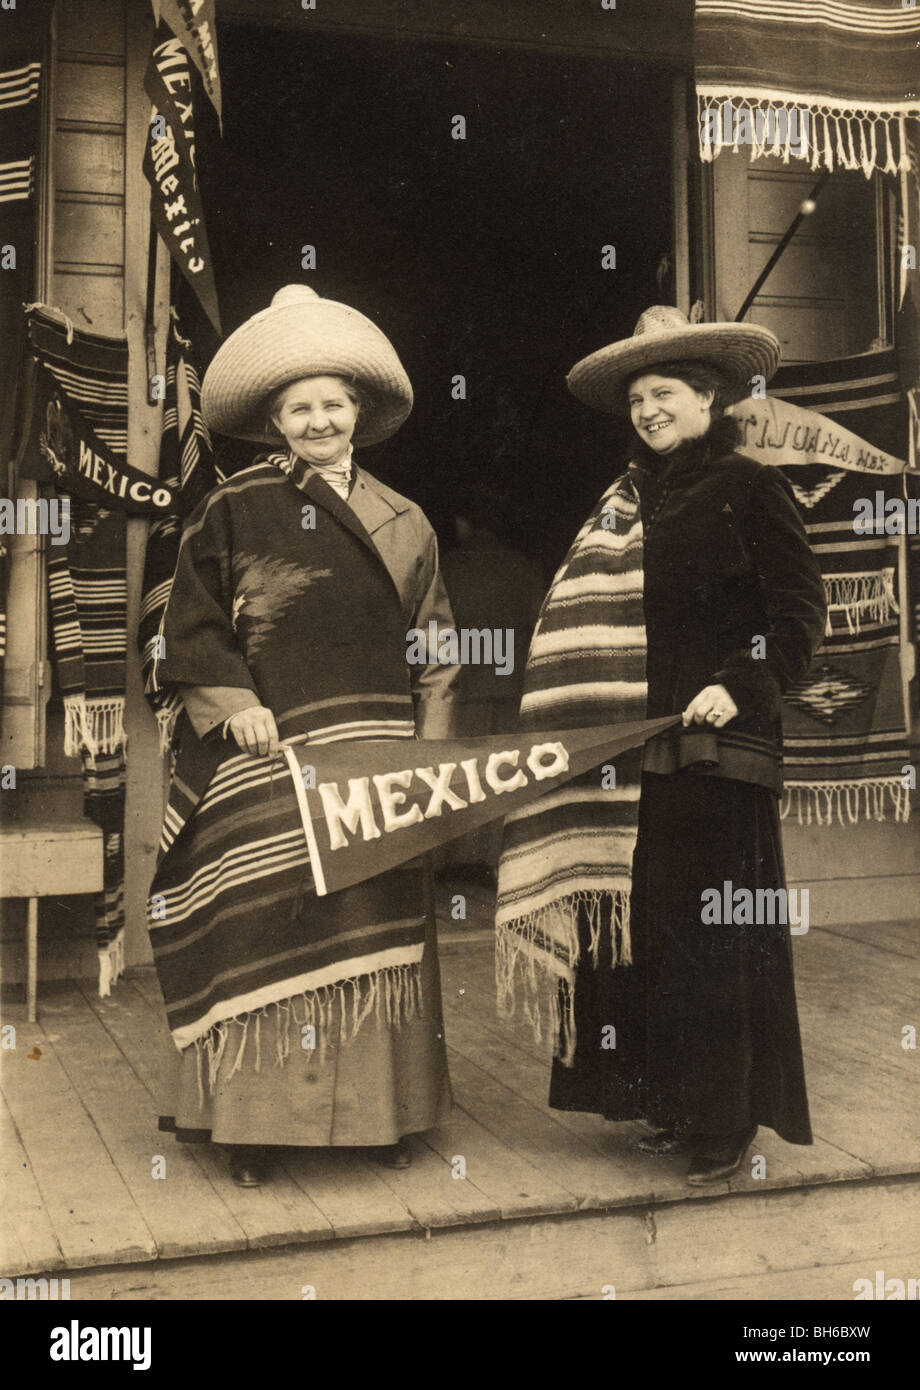 Two Middle Aged Women Tourists in Mexico Stock Photo